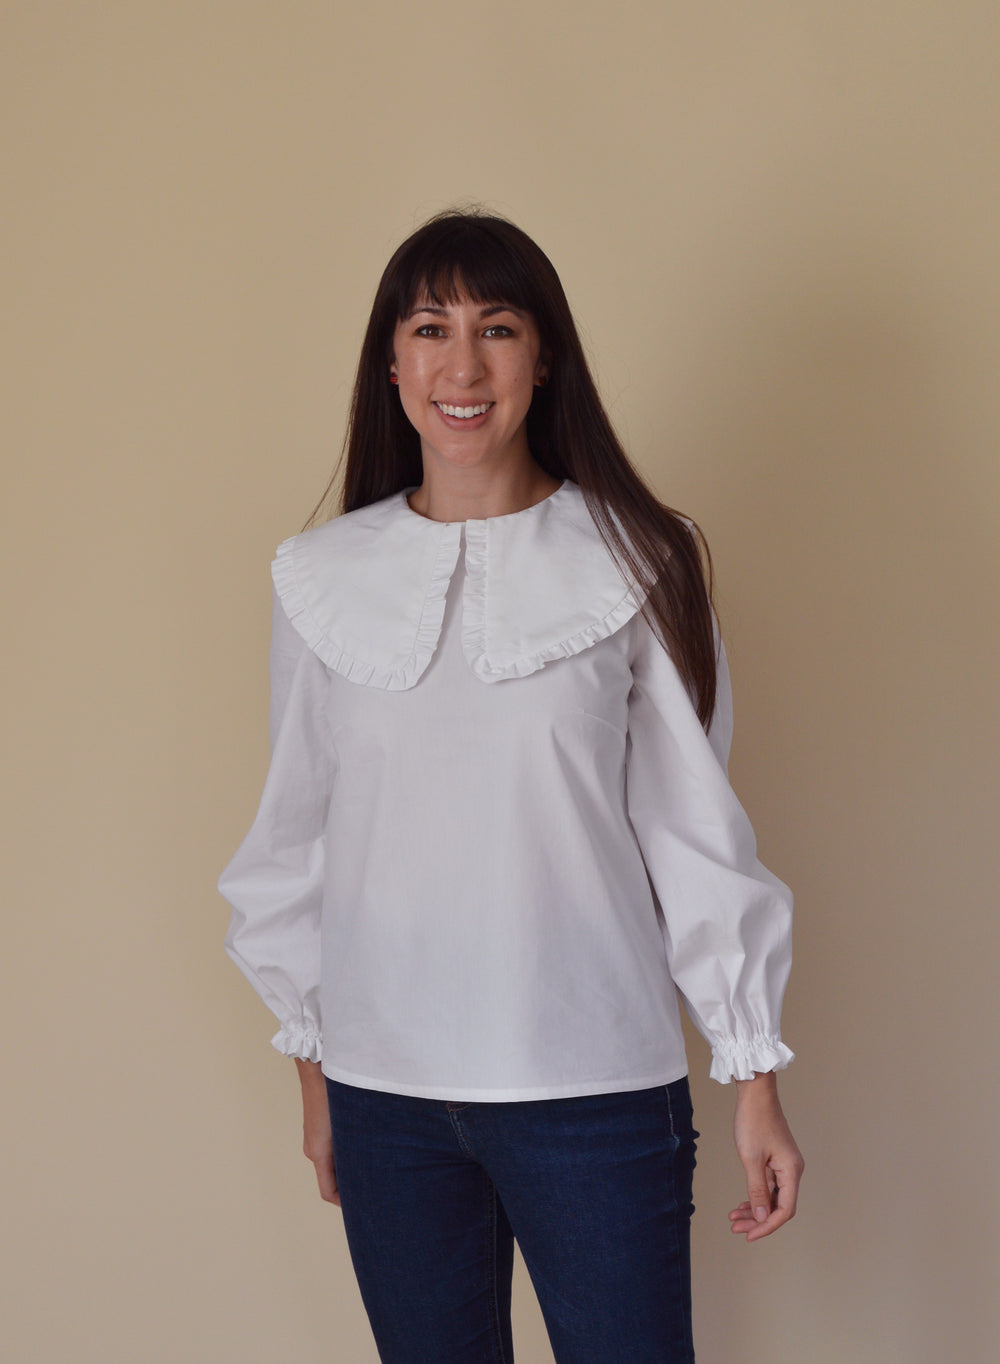 Woman wearing the Bakerloo Blouse sewing pattern from Nina Lee on The Fold Line. A blouse pattern made in lawn, poplin, chambray, silk dupion, crepe or fine needlecord fabrics, featuring a large ruffled collar, balloon sleeves with elasticated cuffs and r